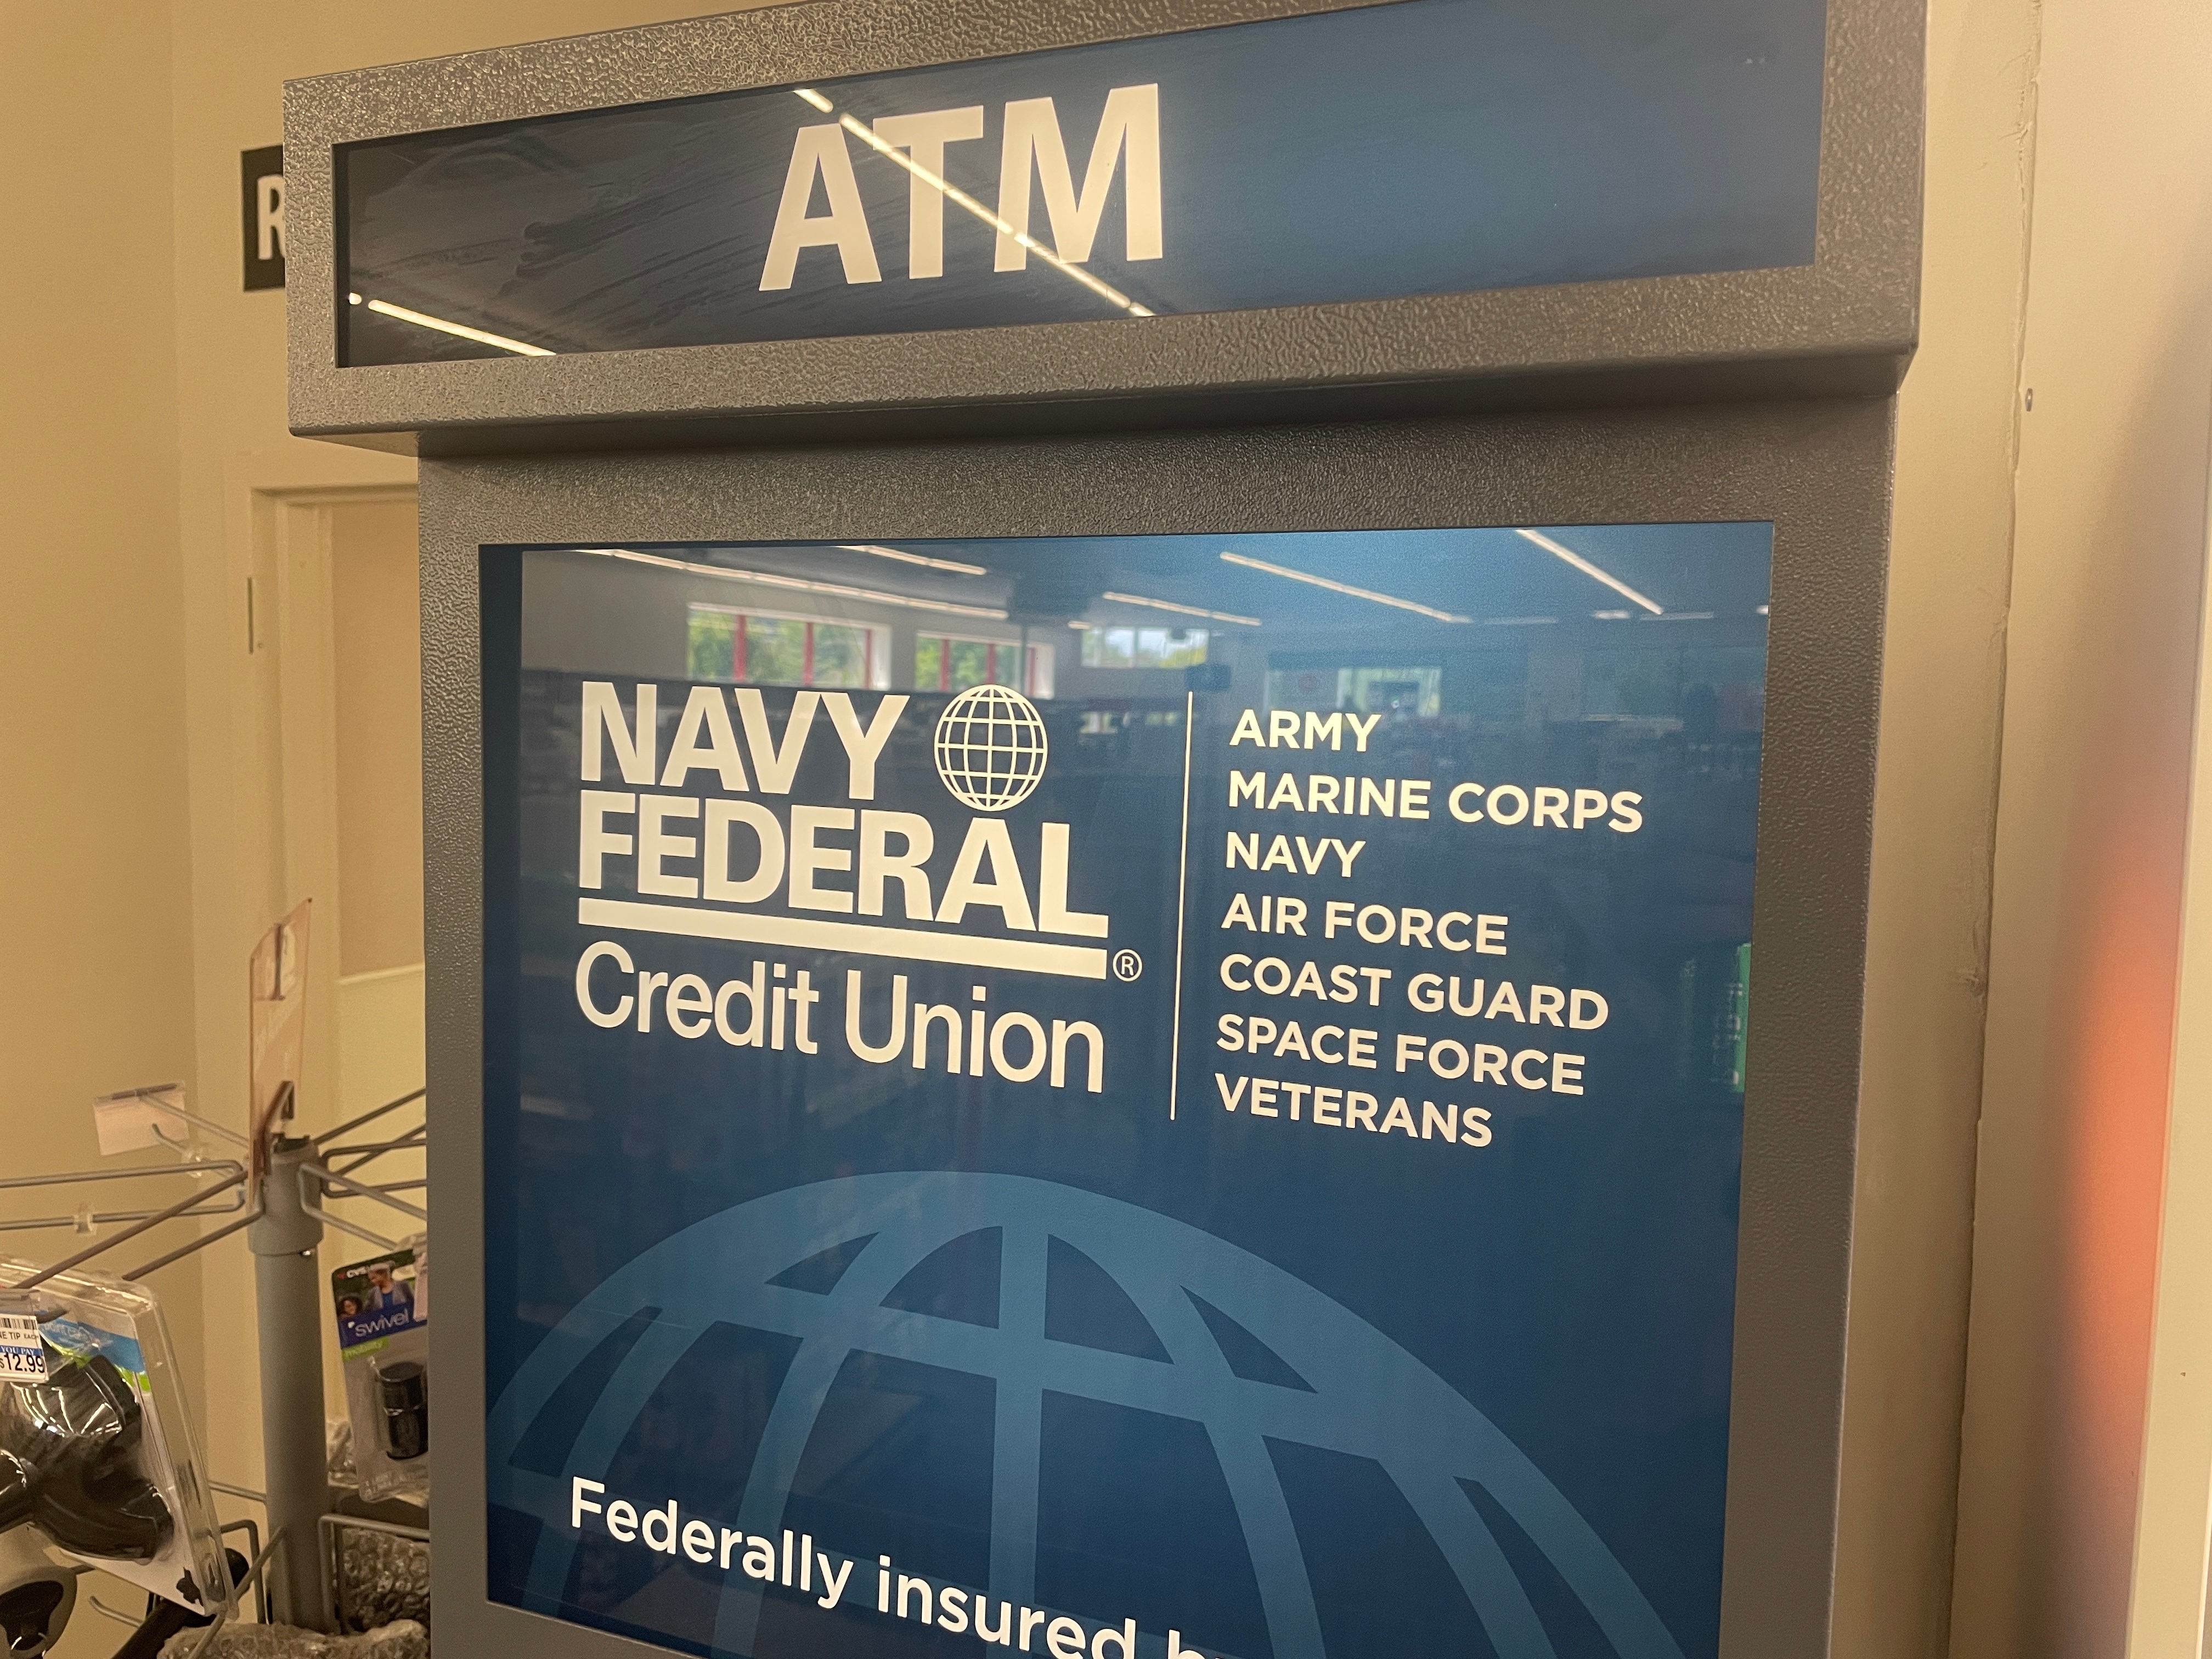 Does navy federal credit union exchange foreign currency? - Answers